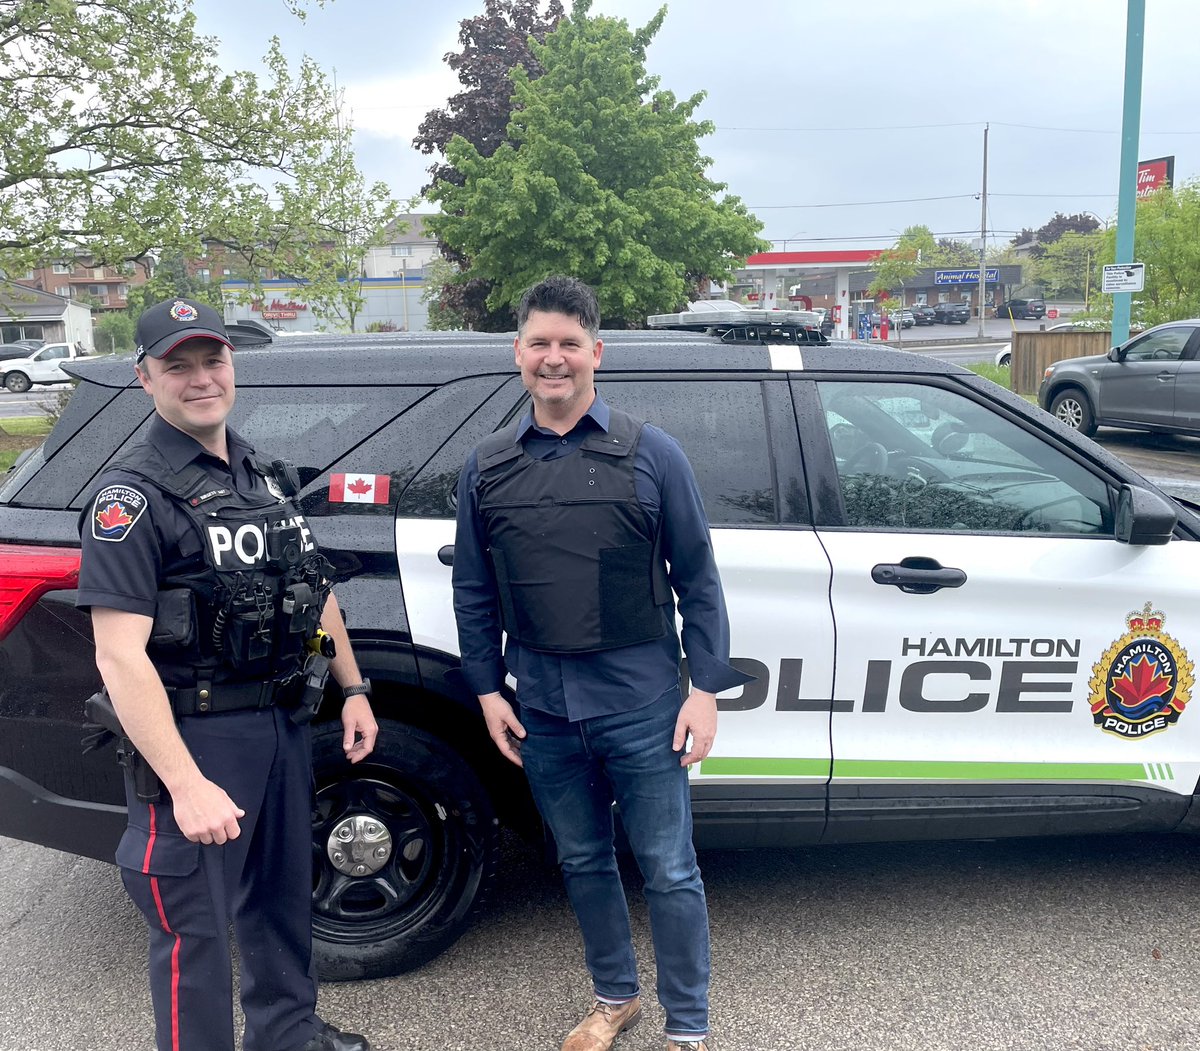 As #NationalPoliceWeek comes to an end, I want to express heartfelt thanks to #HamOnt Police & RCMP for all you do to ensure our safety & security. Thank you Cst Burgess of @HamiltonPolice for taking me on a ride-along to see firsthand the situations officers deal with daily.